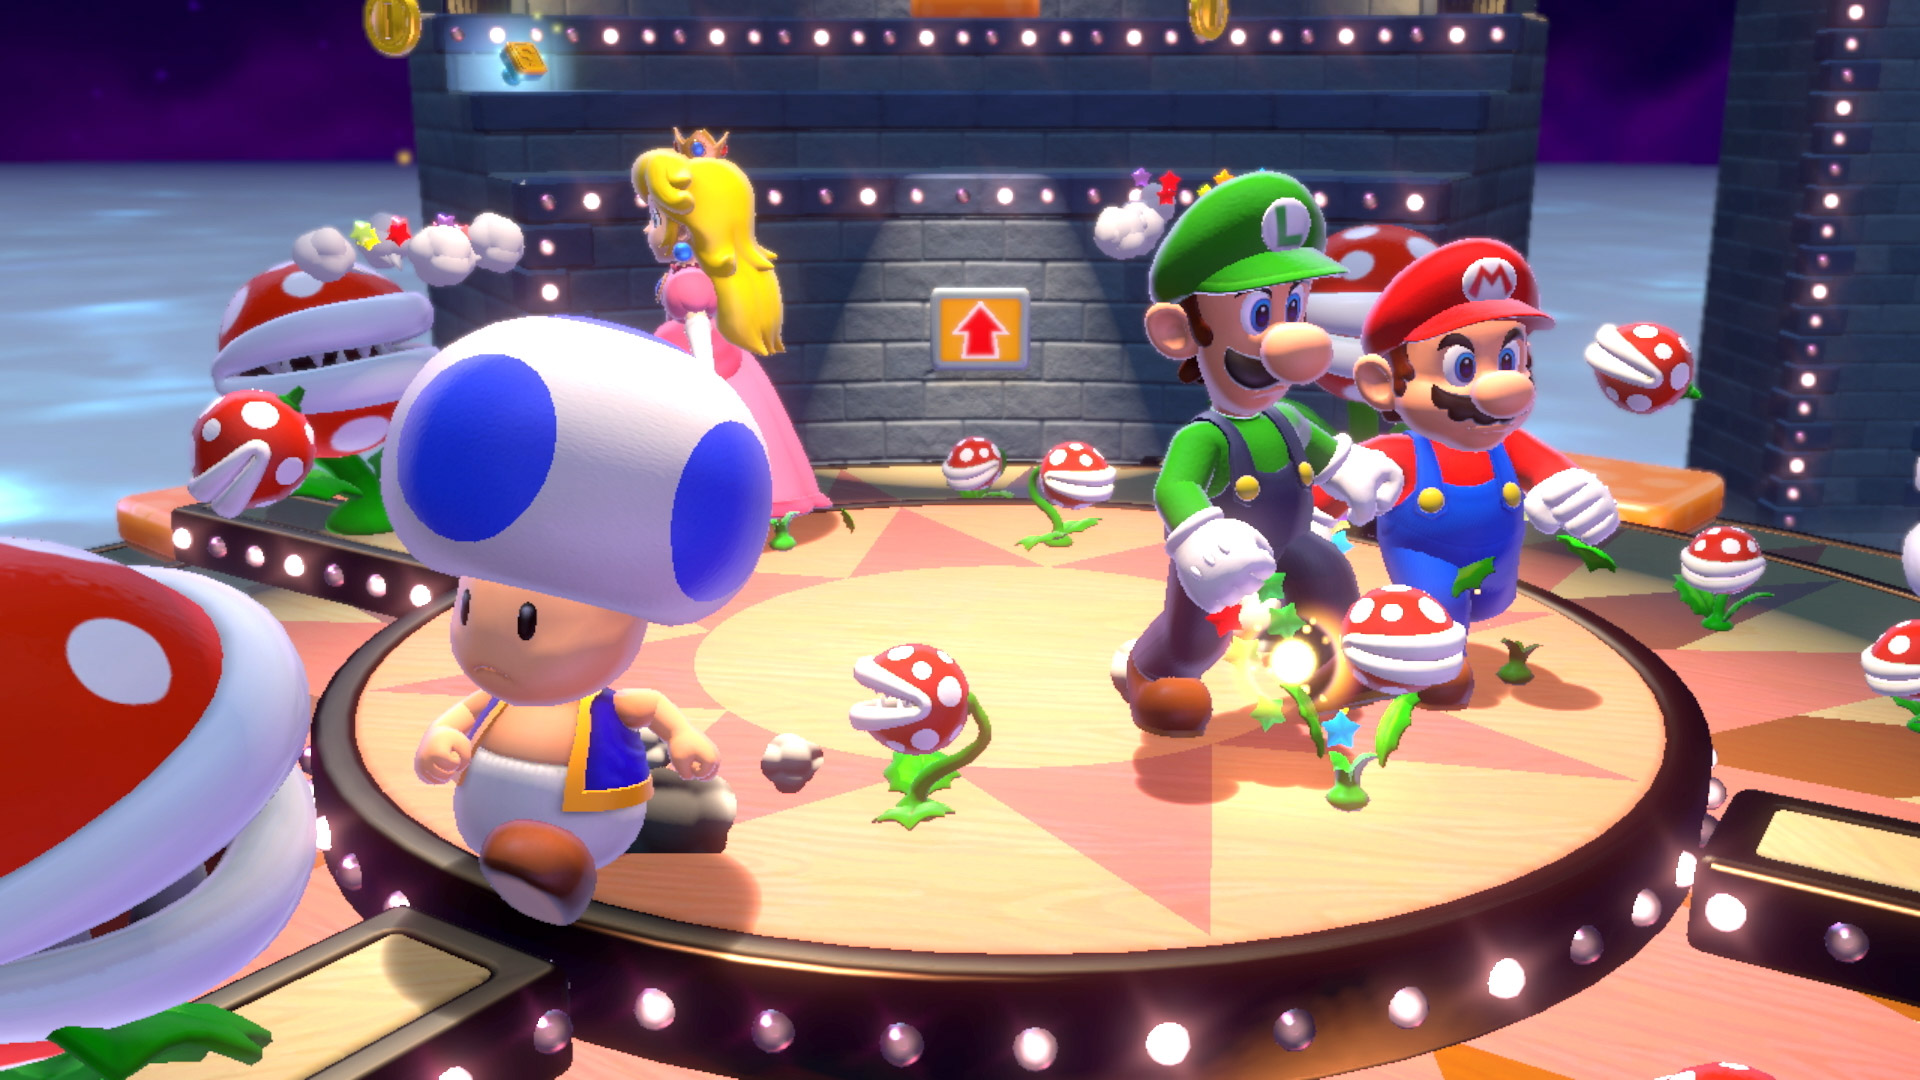 Nintendo mascots battle it out in Super Mario Bros. 3D World